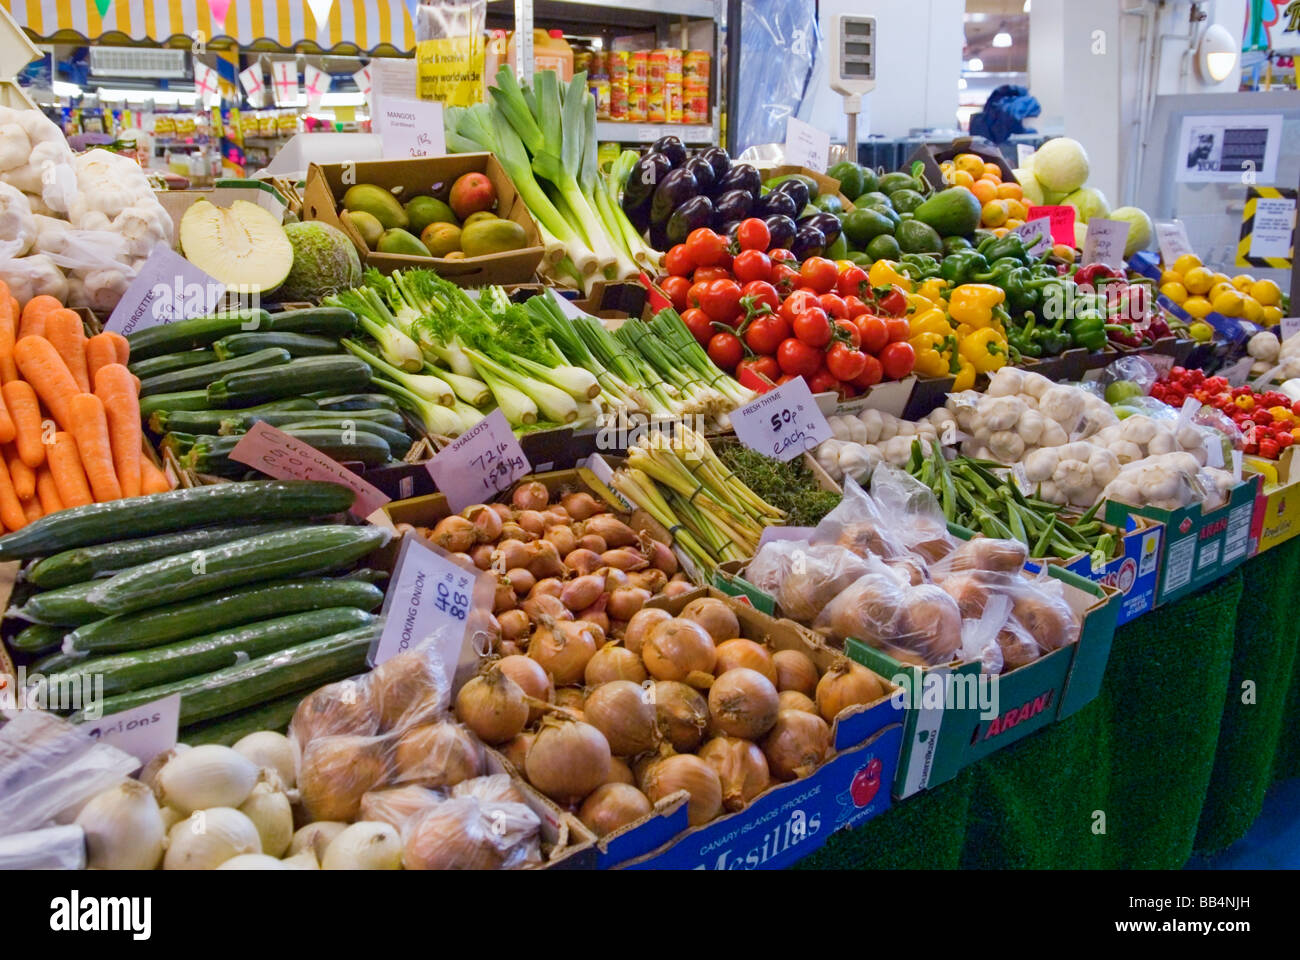 Fruit and Veg stall at Coventry Retail Market Stock Photo